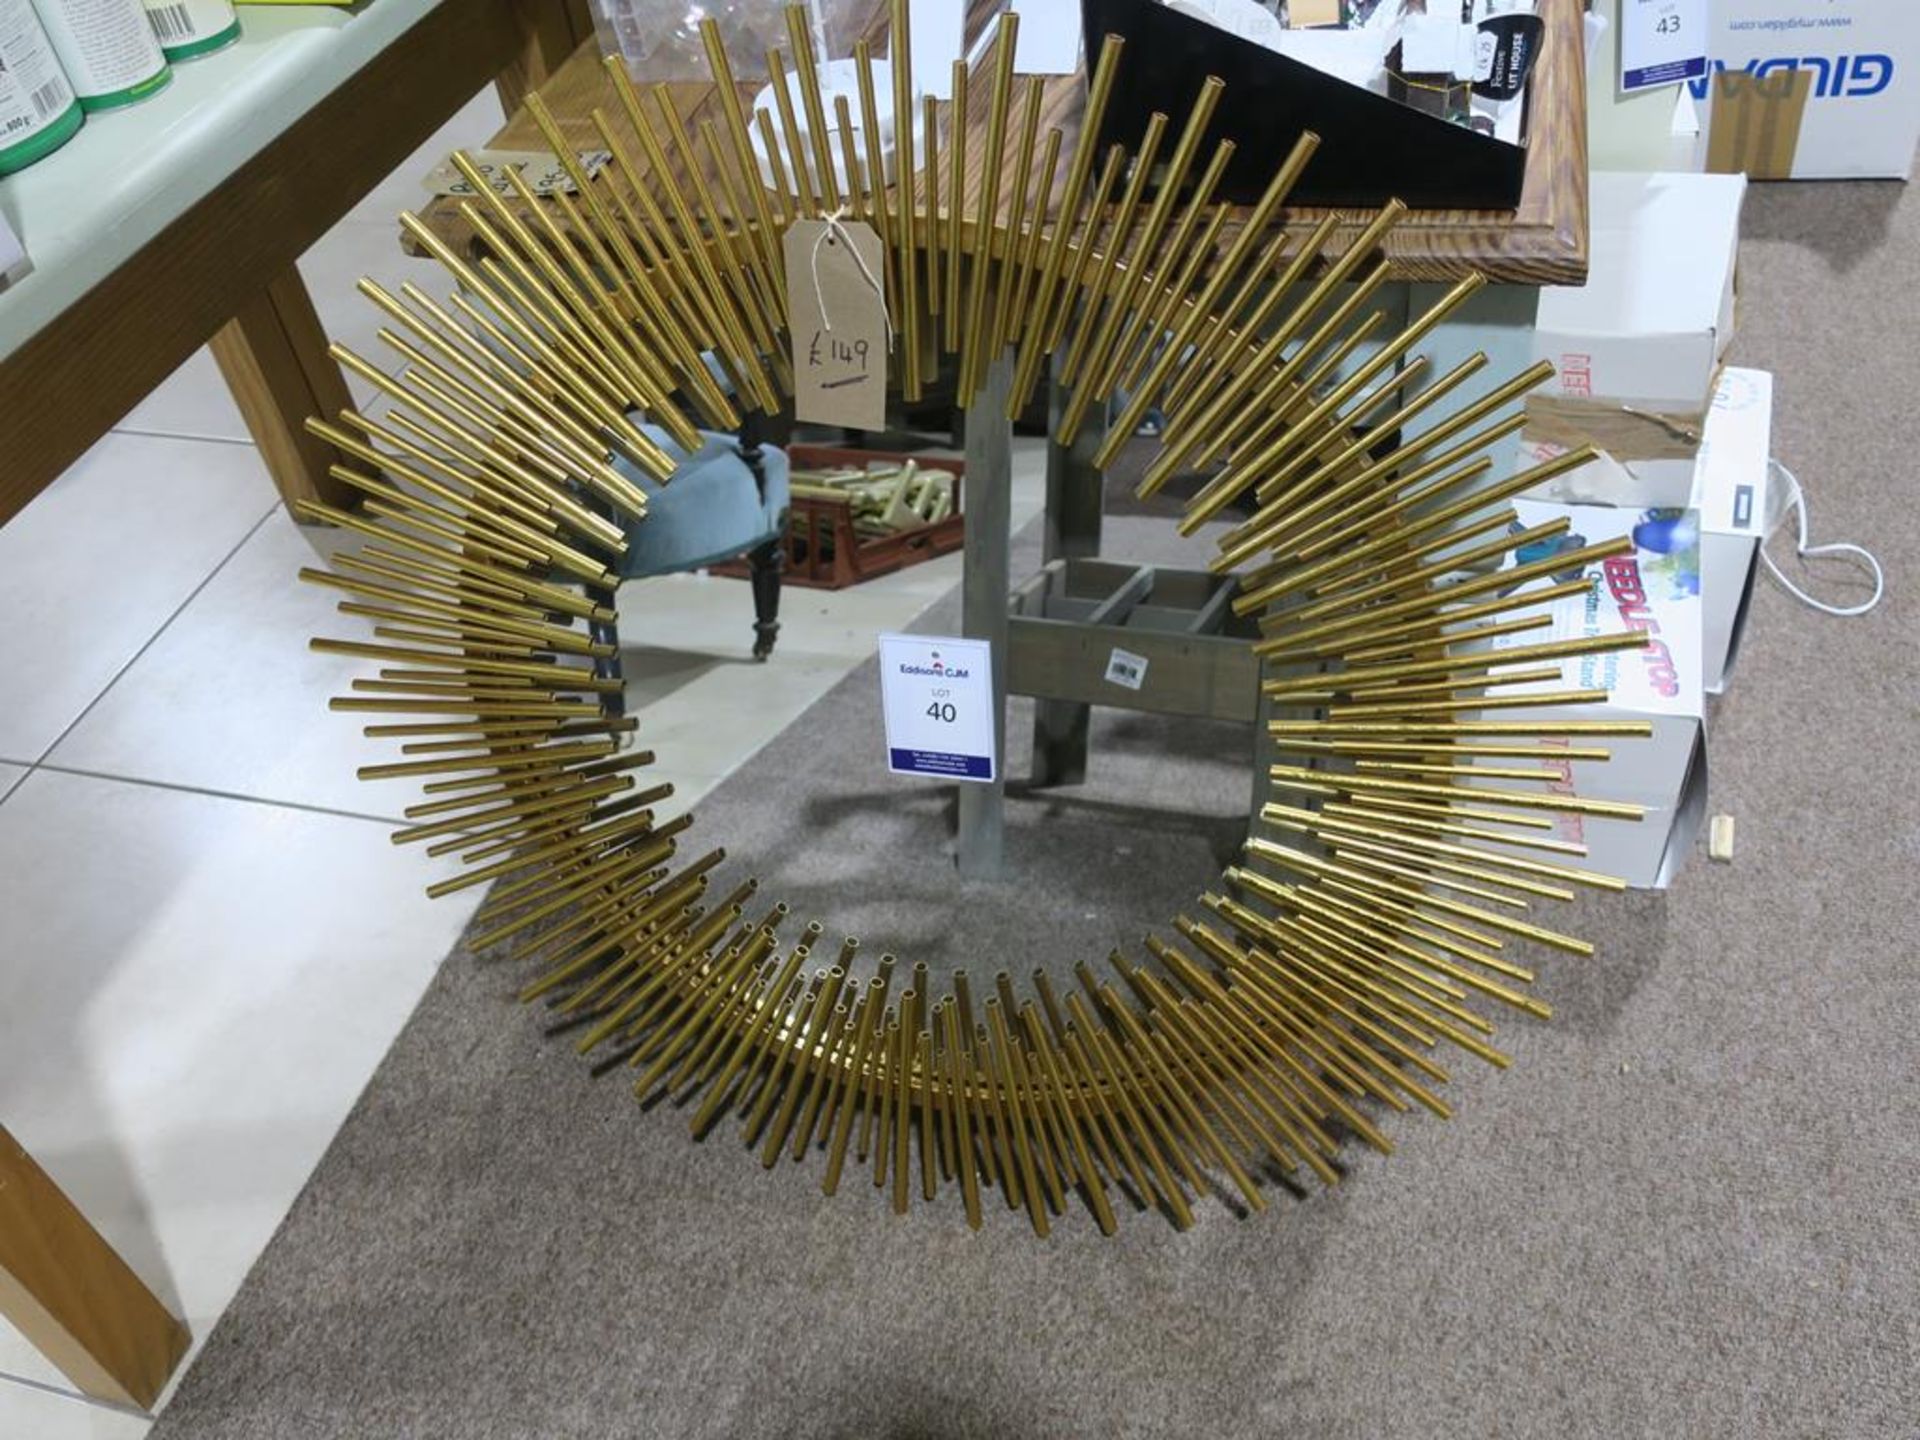 * A Large Decorative Mirror with Gold Coloured Tubing (diameter 91cm) (RRP £149)